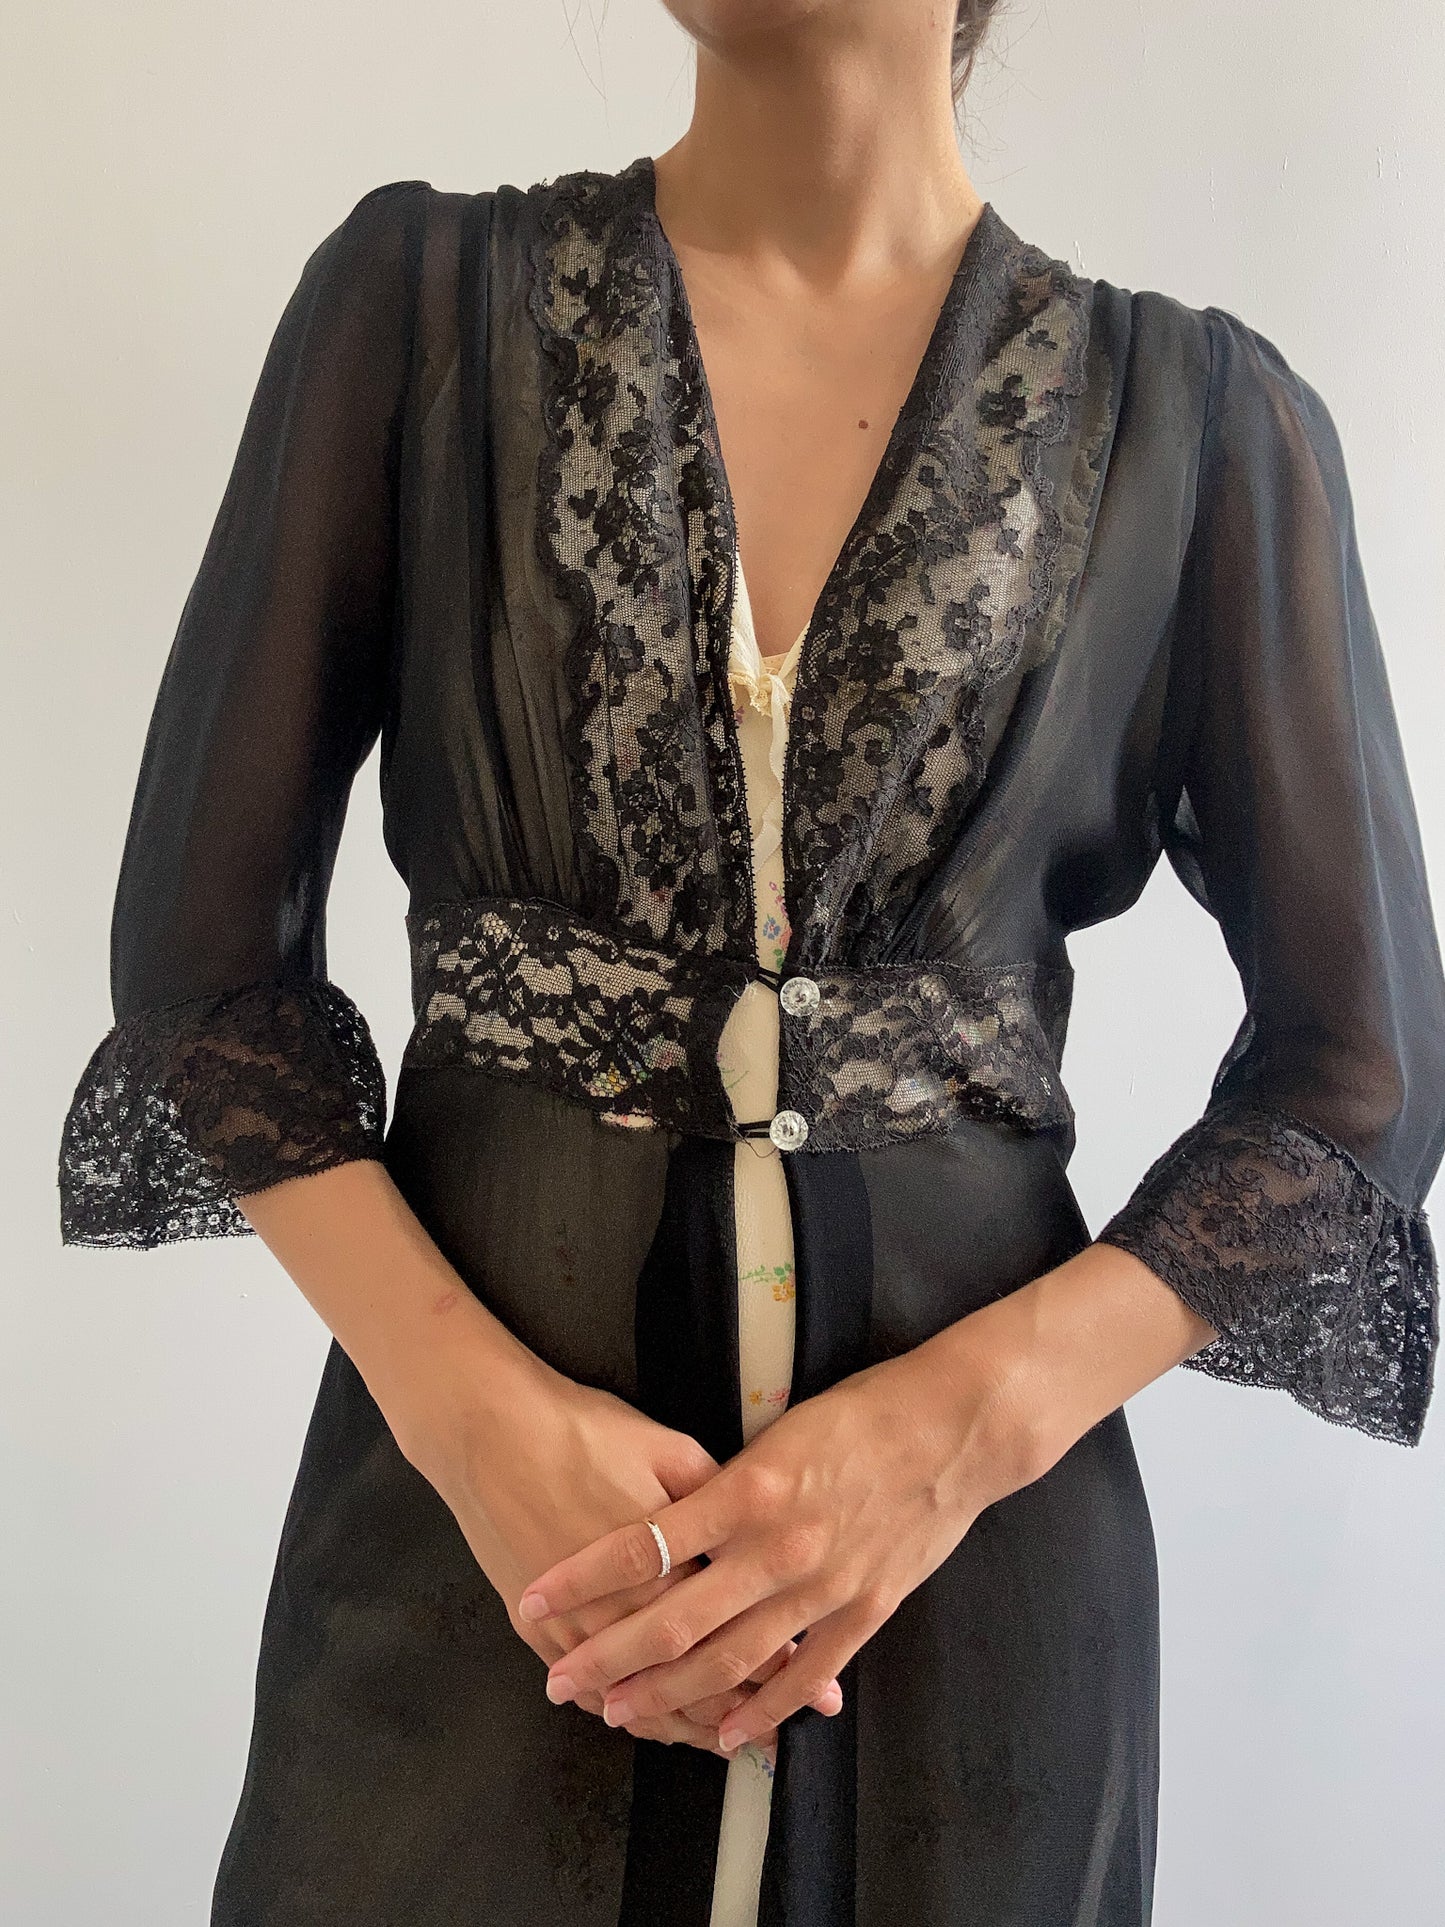 1930s Black  Chiffon Robe with Floral Lace